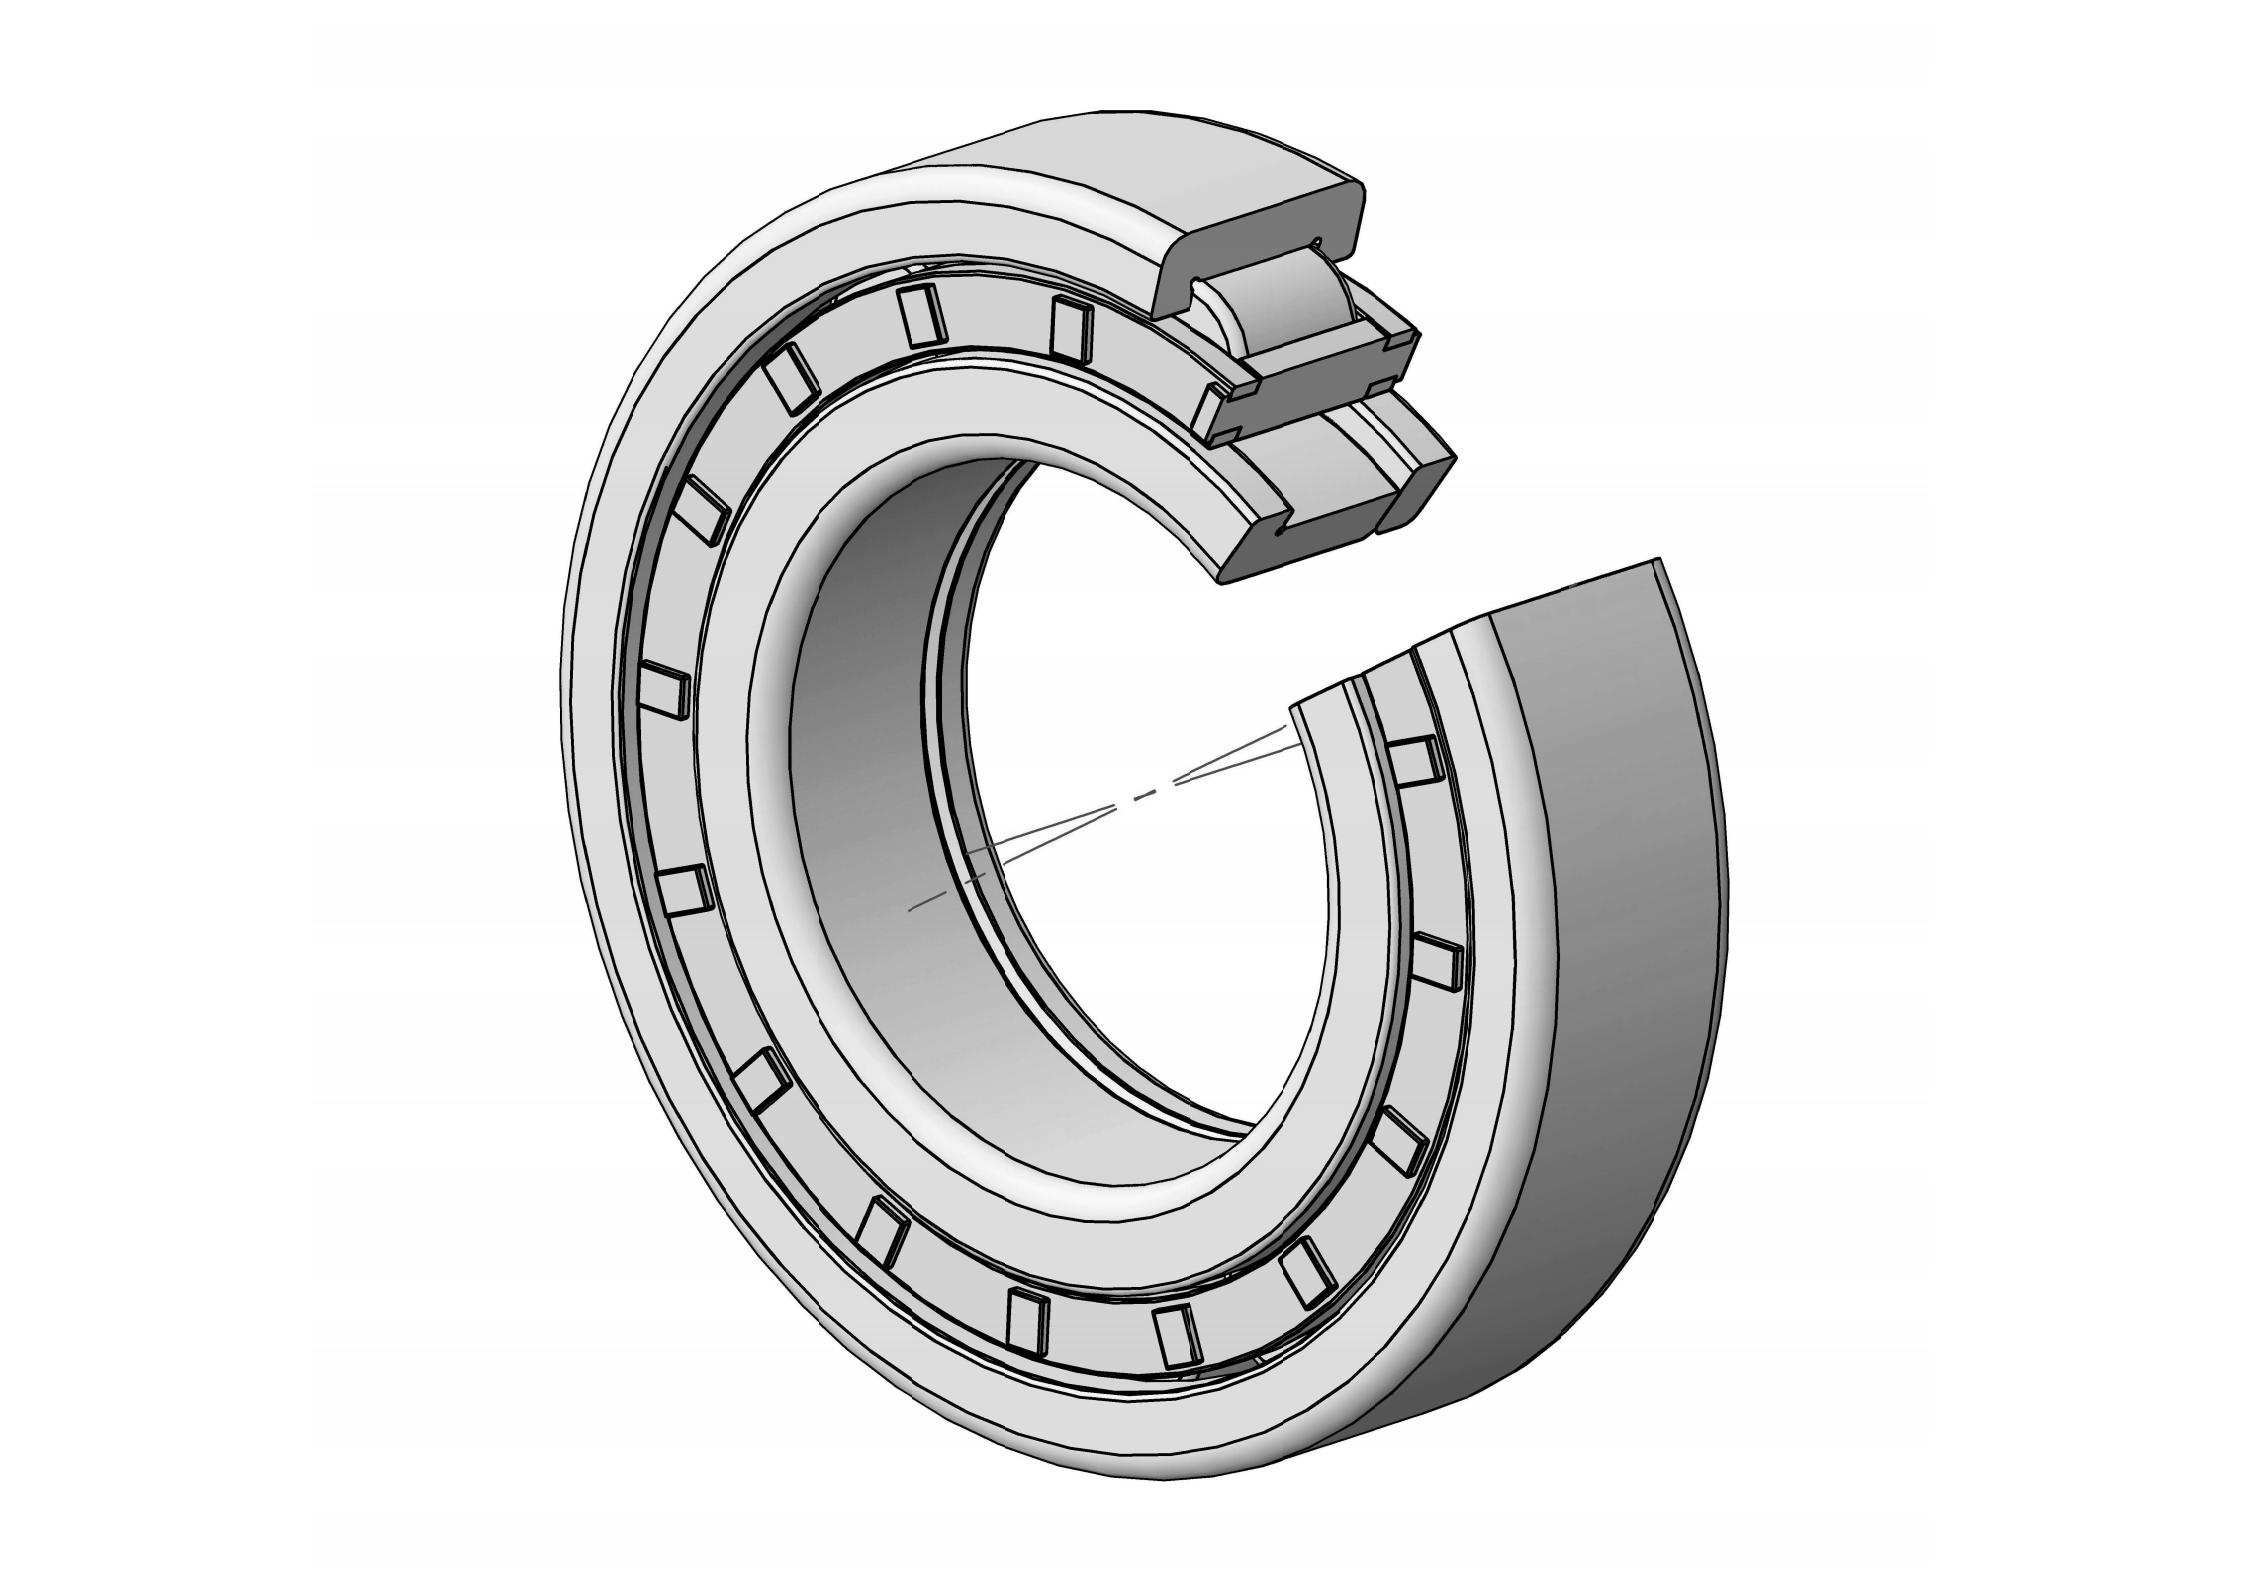 NUP2224-EM Single Row Cylindrical roller bearing 